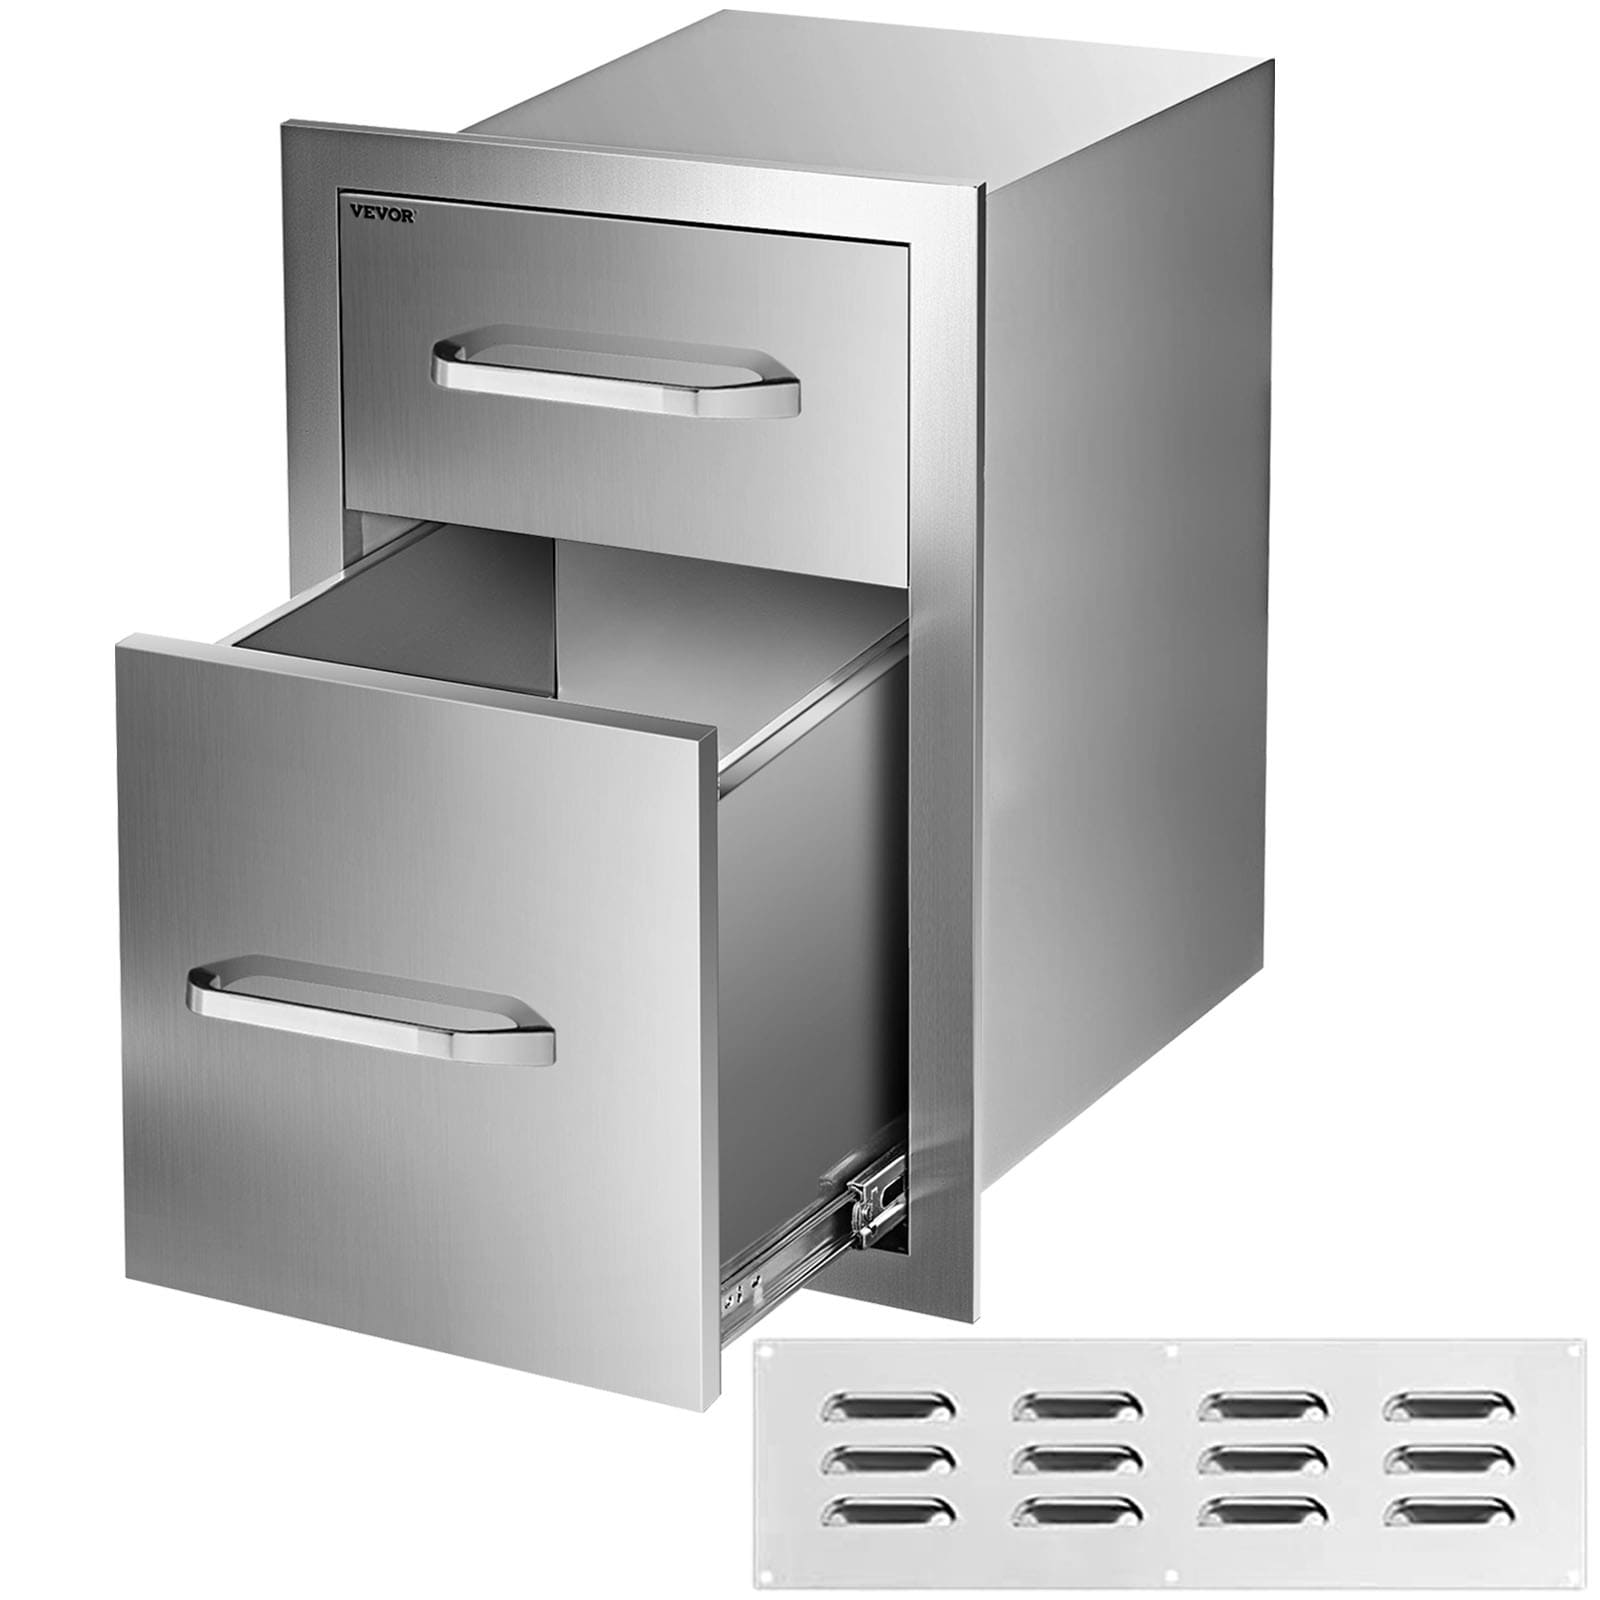 Nurxiovo Outdoor Kitchen Drawer Stainless Steel 33x23.5x13.5 Inch with Handles Used for BBQ Double Drawer 1 Tier Double Drawer Chrome 